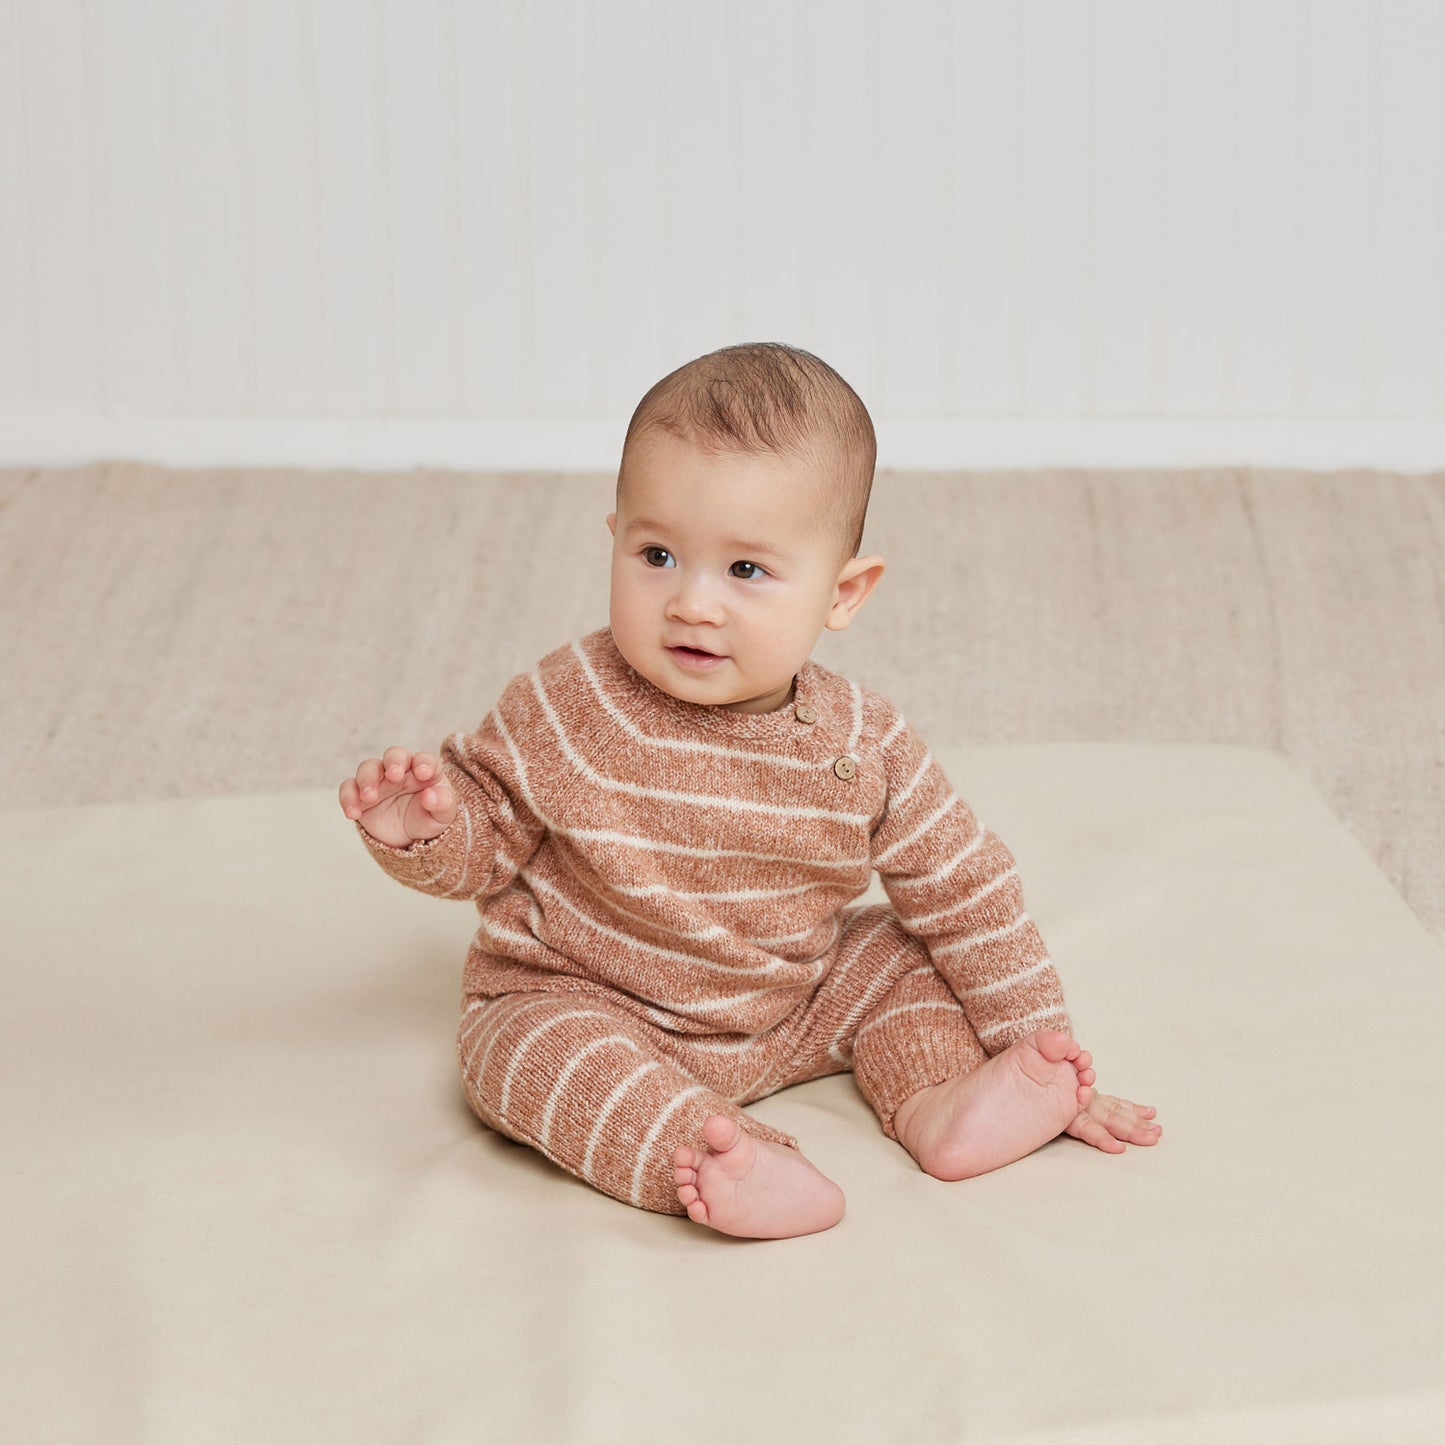 Baby wearing Quincy Mae Ace Knit Sweater - Cinnamon Stripe - Heathered